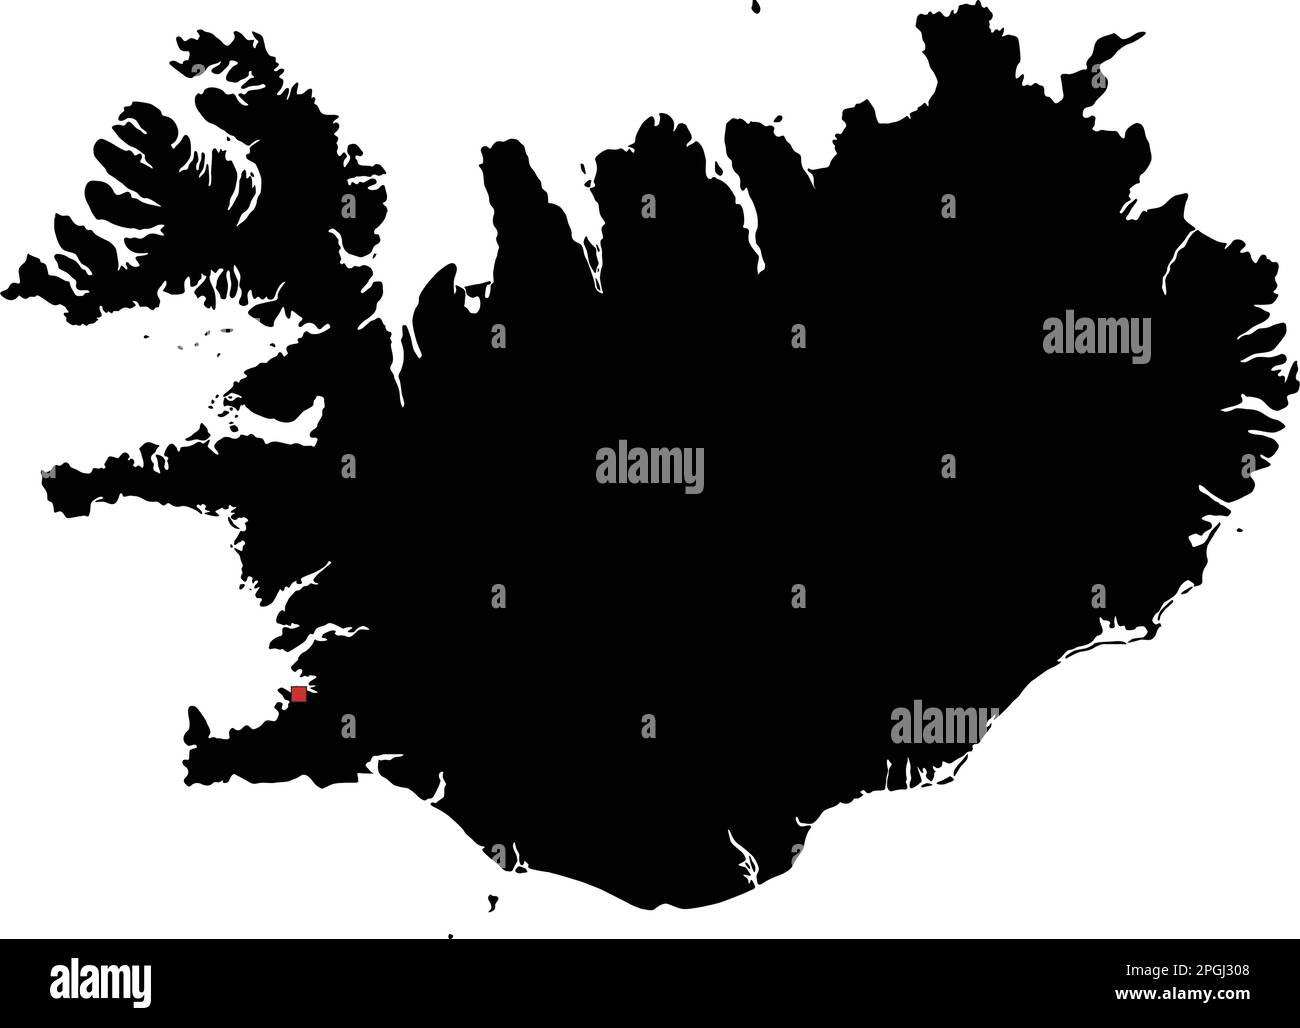 Highly Detailed Iceland Silhouette map. Stock Vector